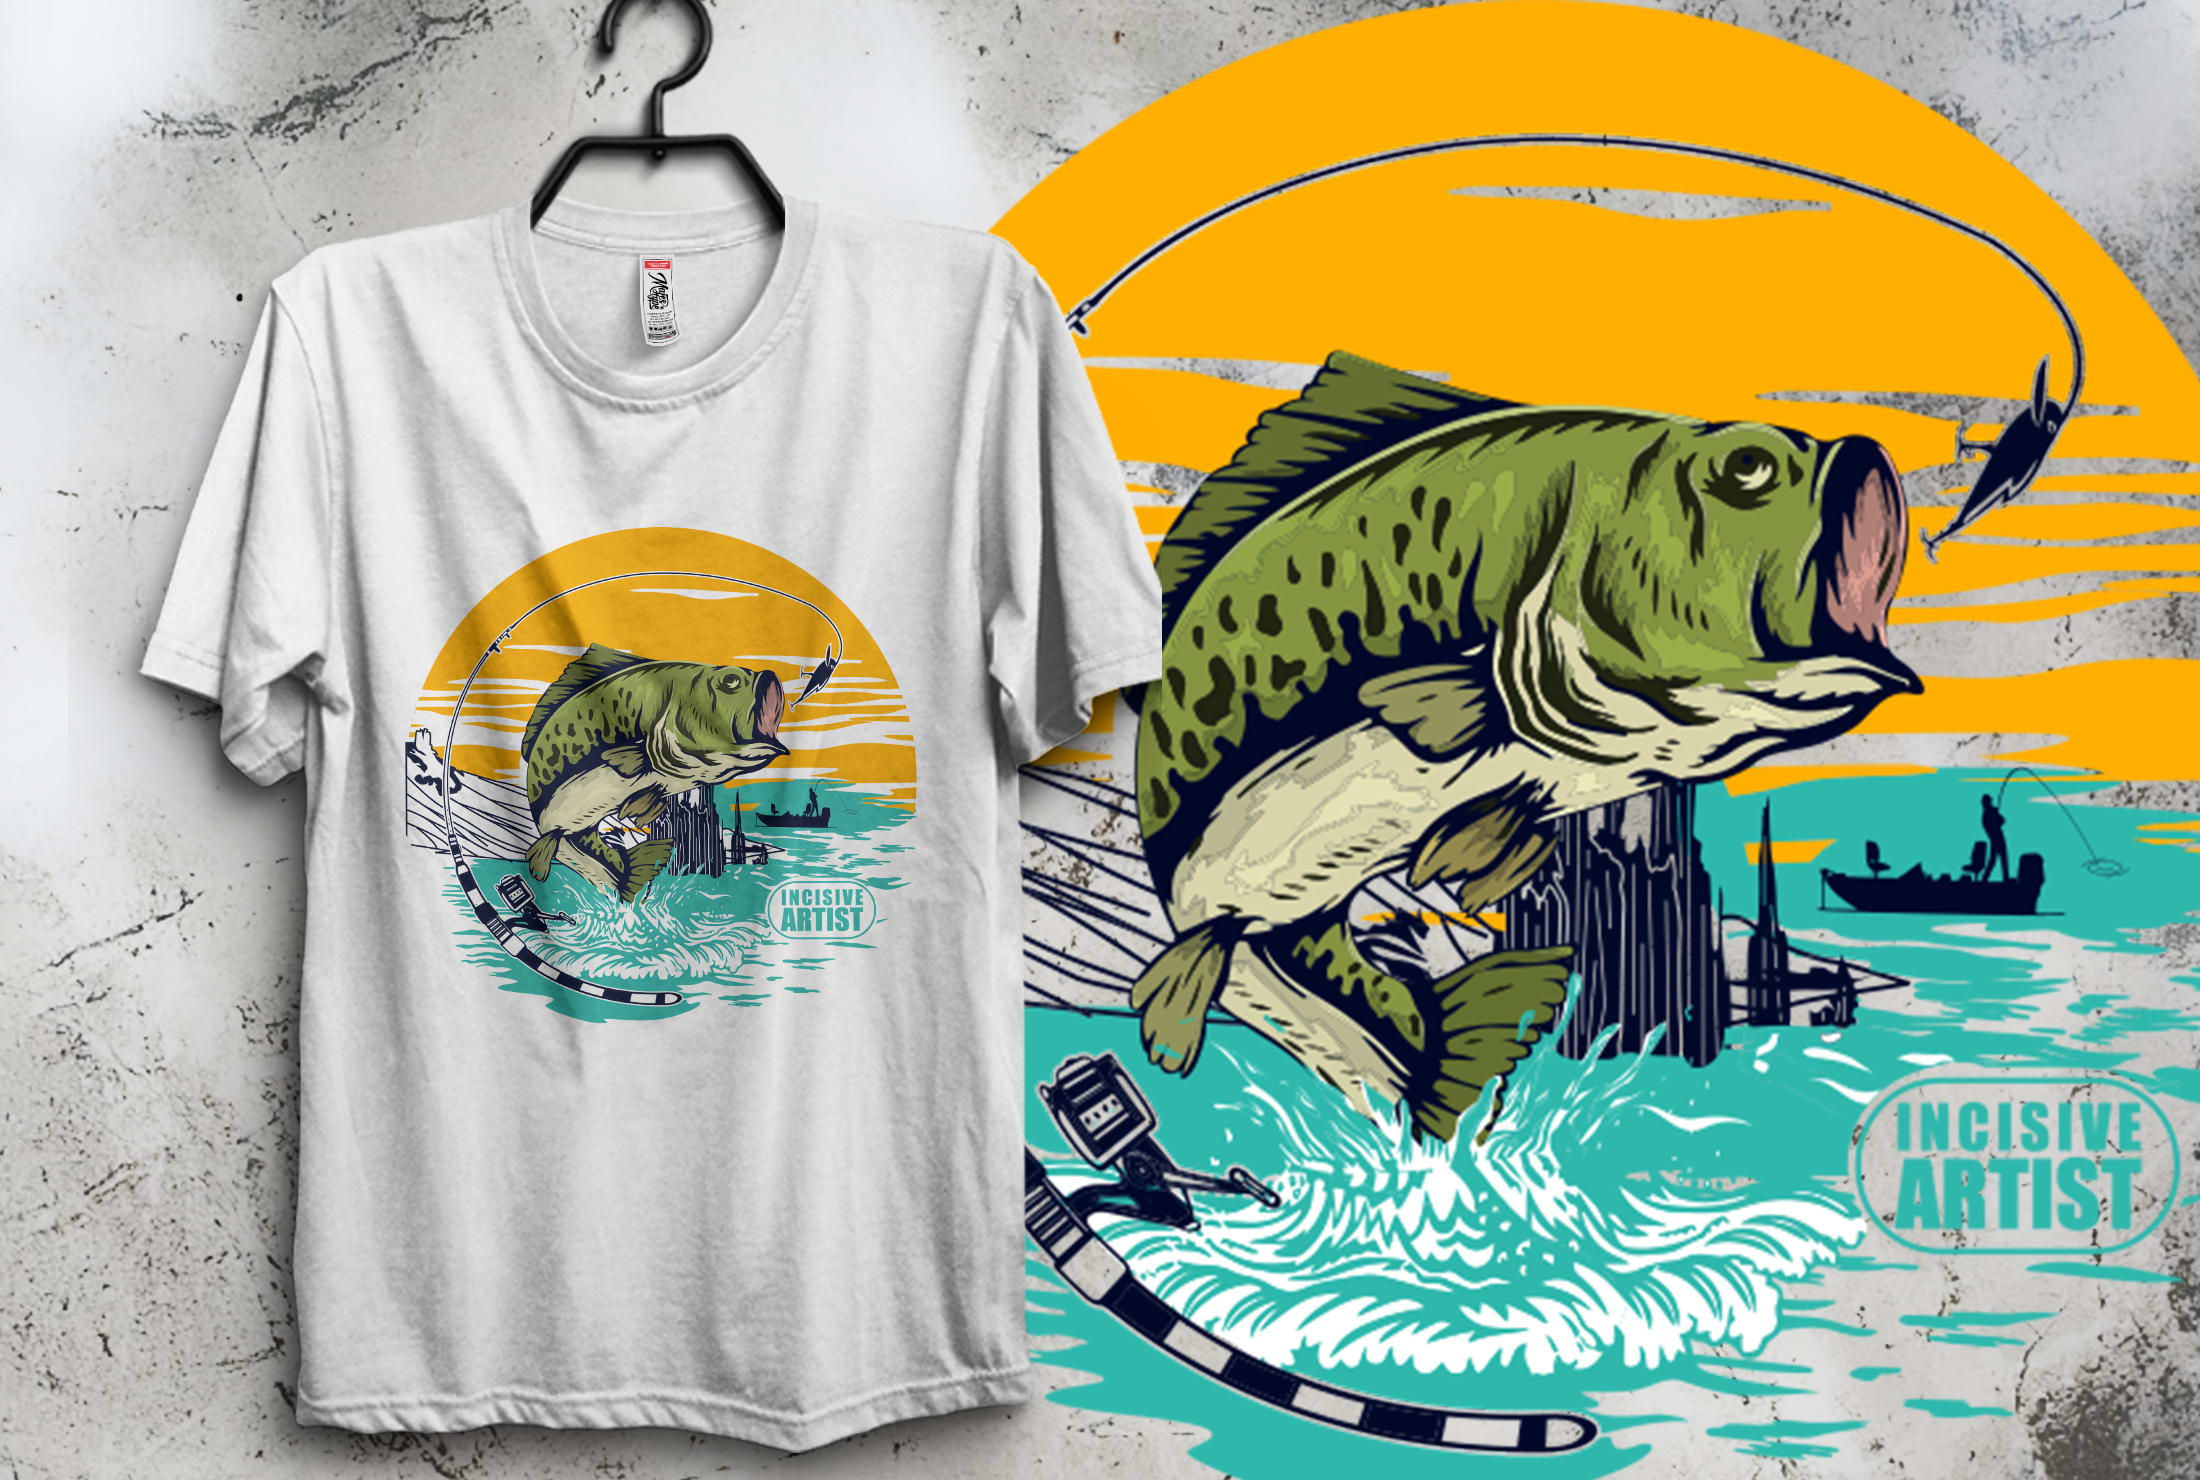 Design fishing and outdoor artwork illustration t shirt by Incisive_artist